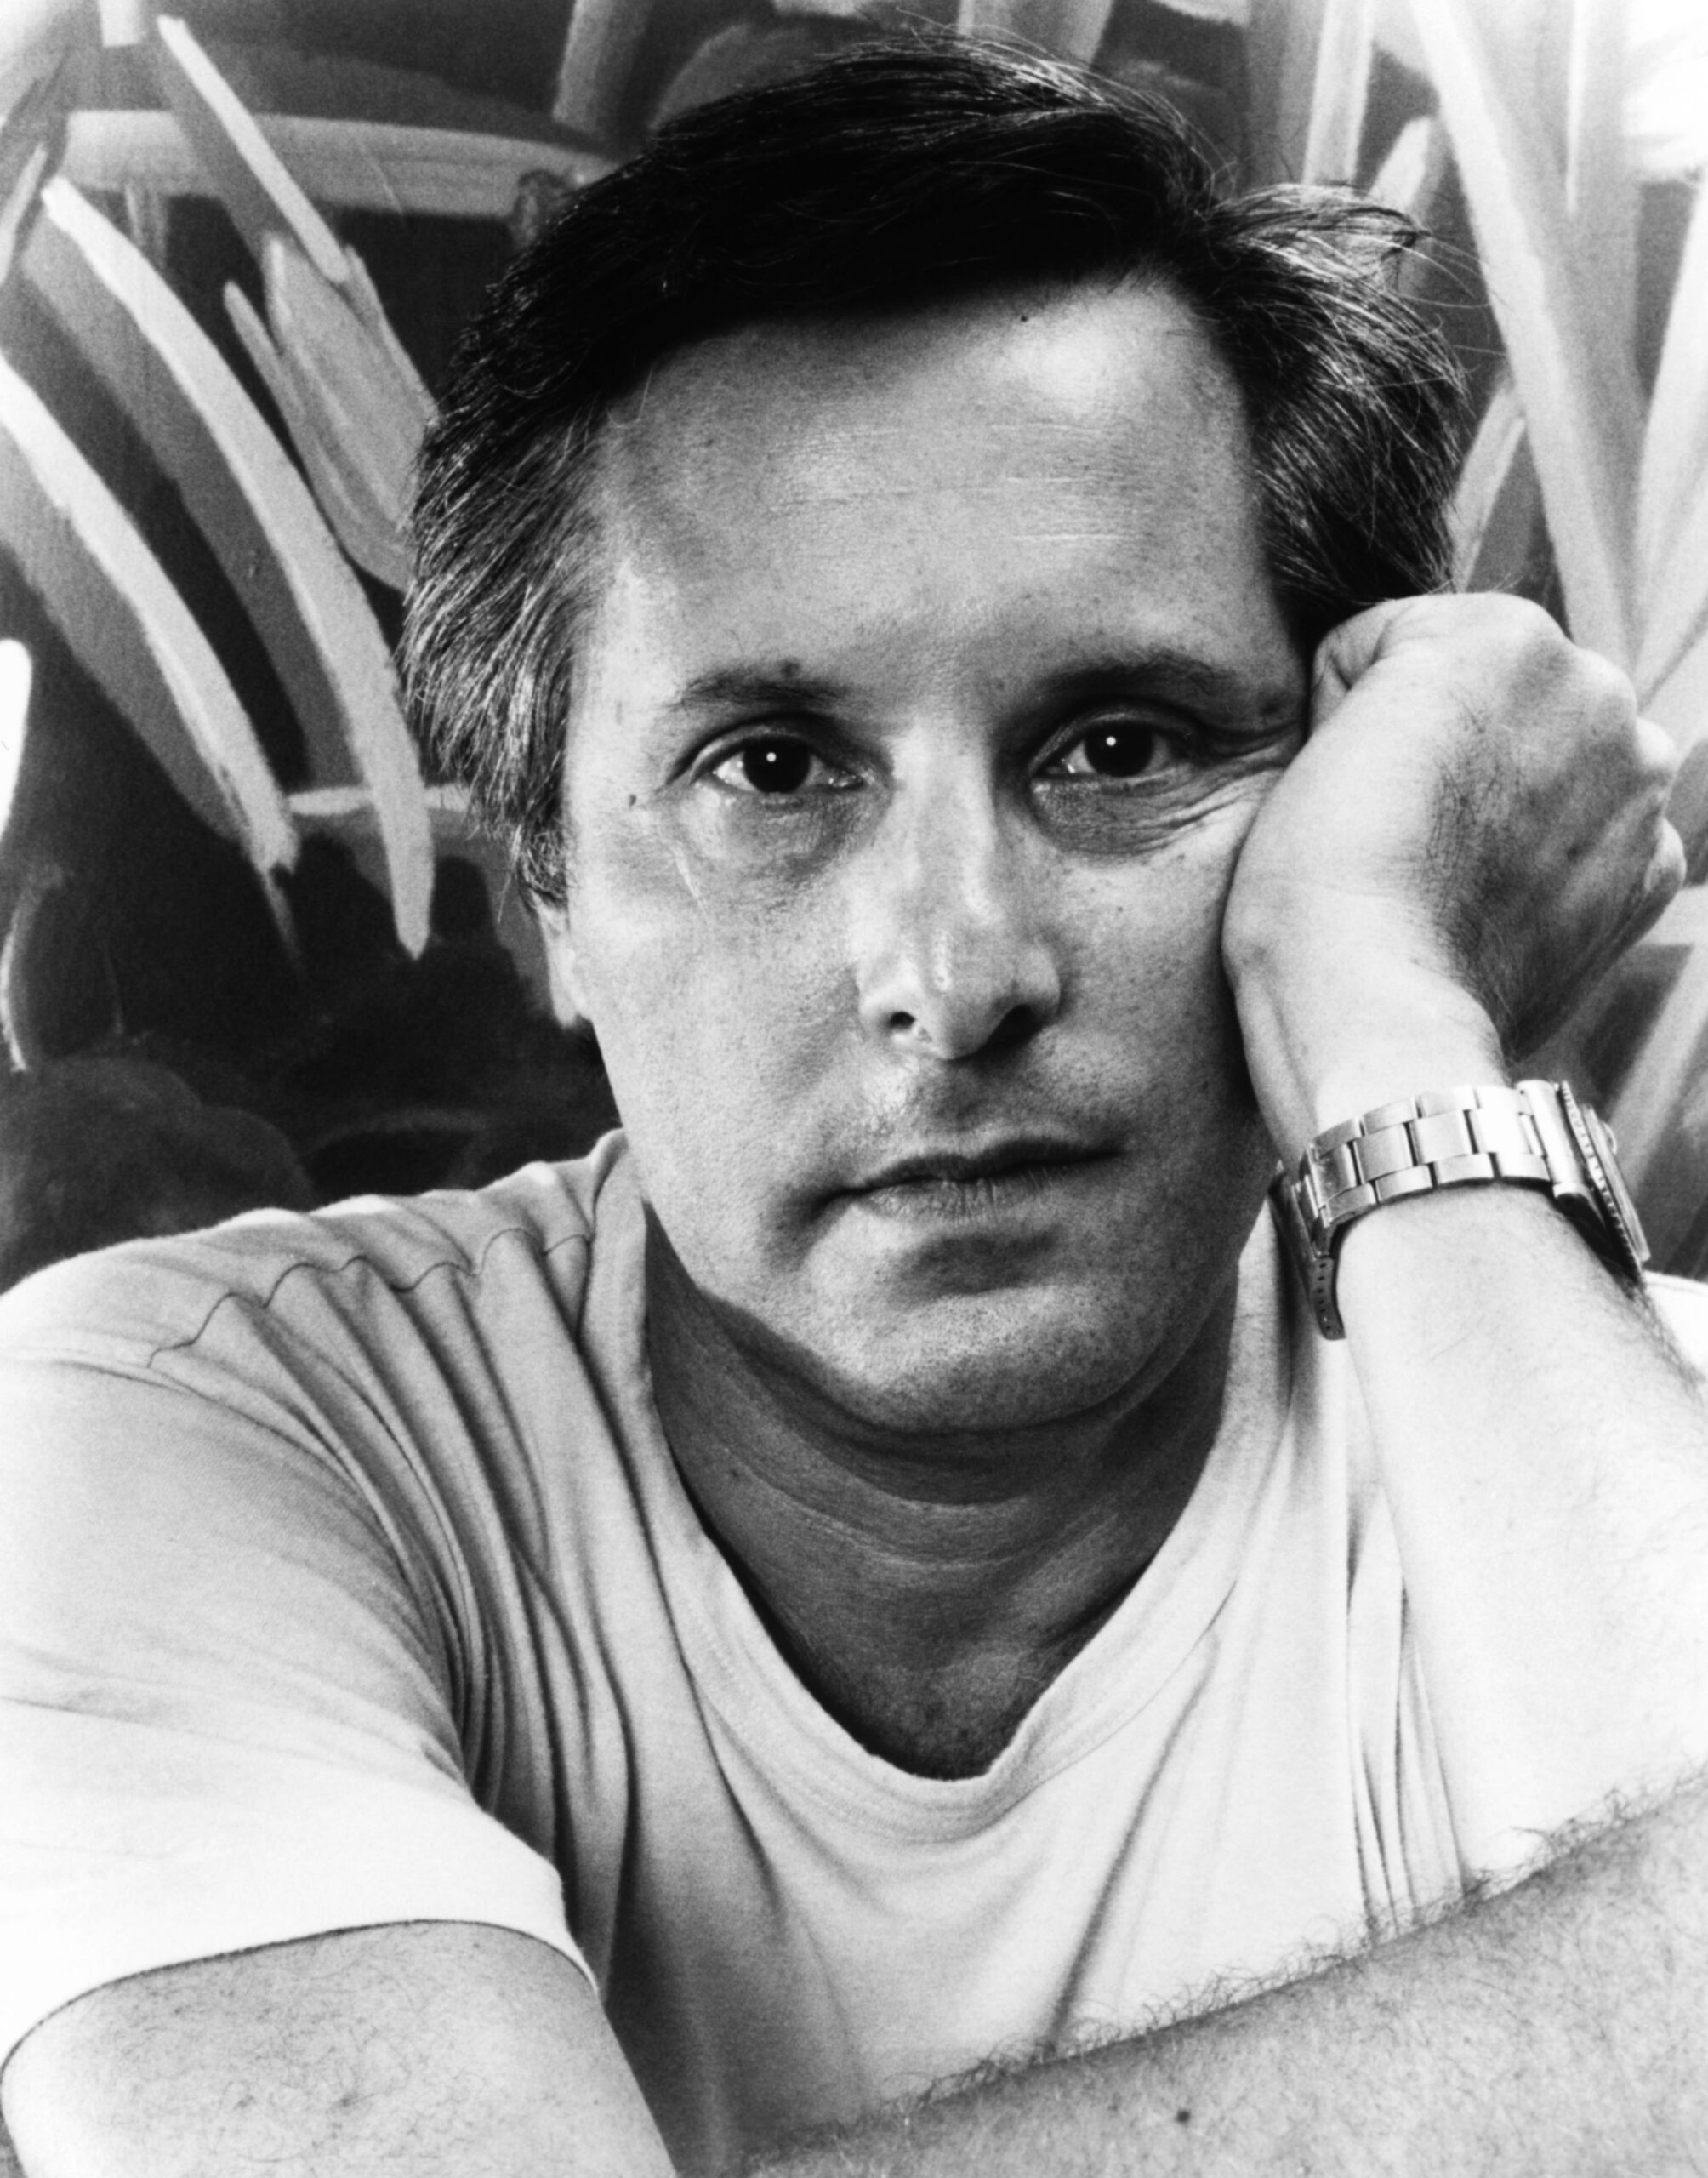 black-and-white close-up portrait photo of director William Friedkin on the set of the 1990 movie "The Guardian." He is resting his left cheek on his left hand, with his right hand supporting his bent left arm at the elbow.